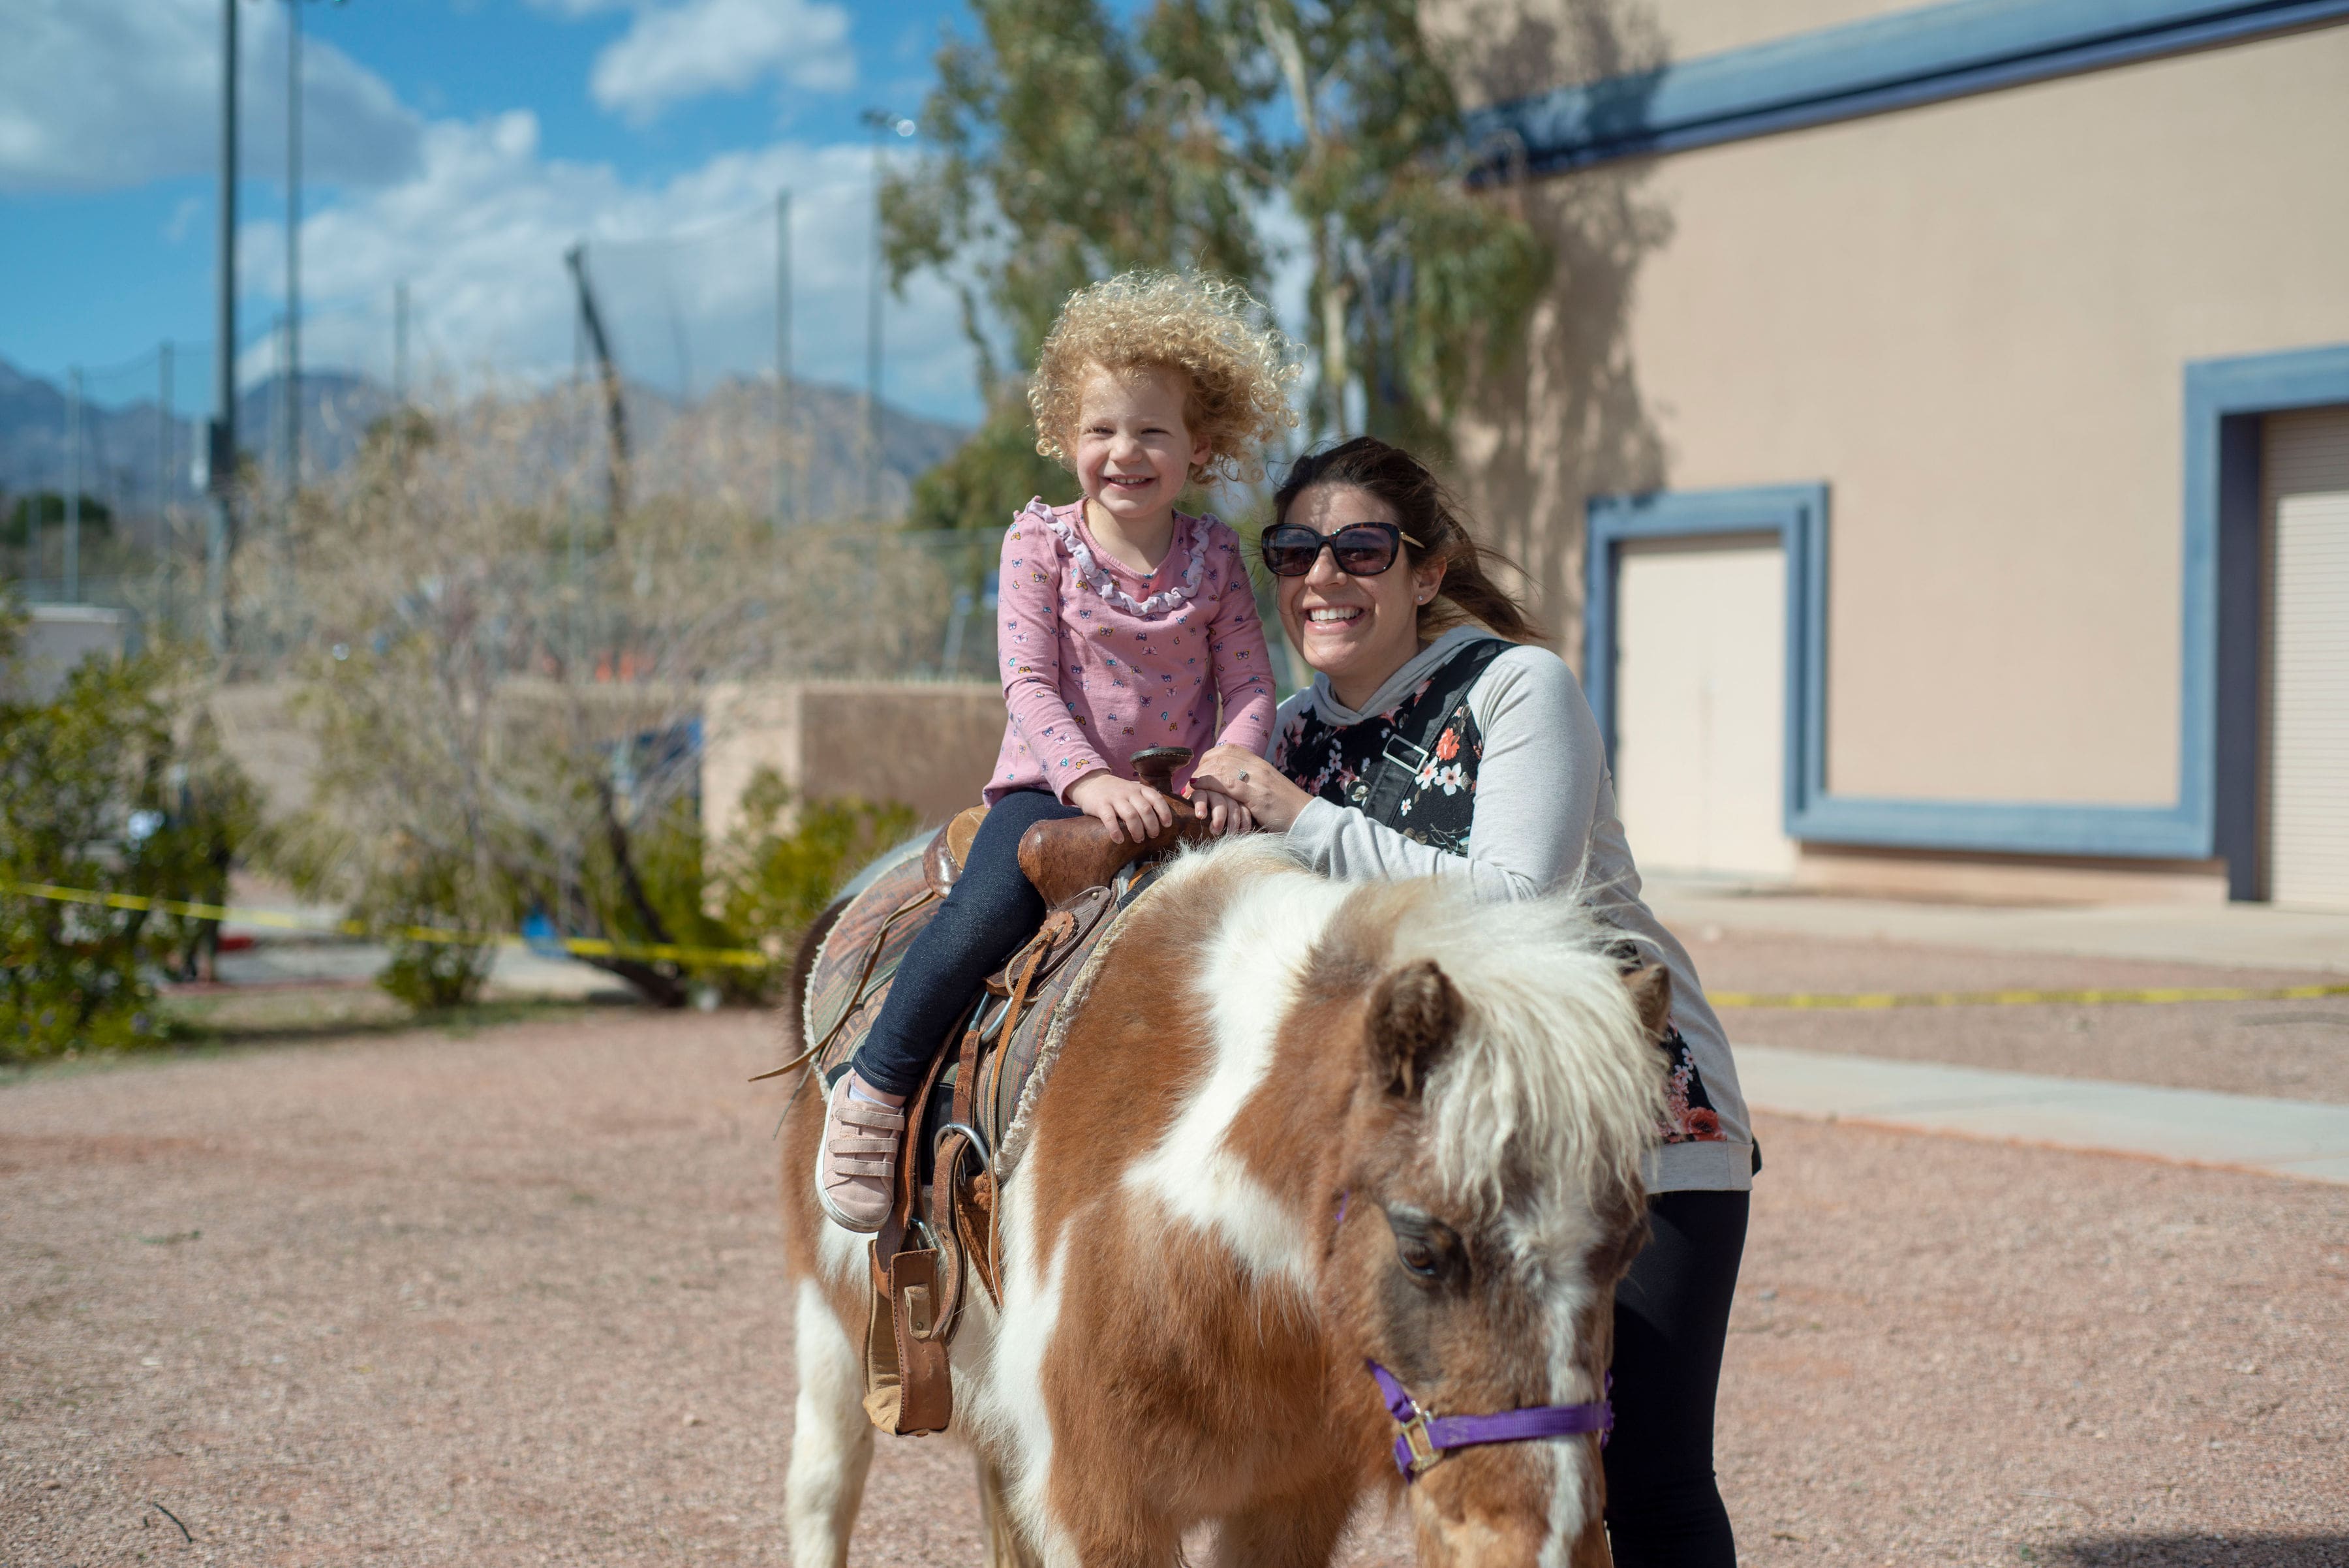 kid on pony ride with friend at at Walk4Friendship fundraiser in Las Vegas, NV 